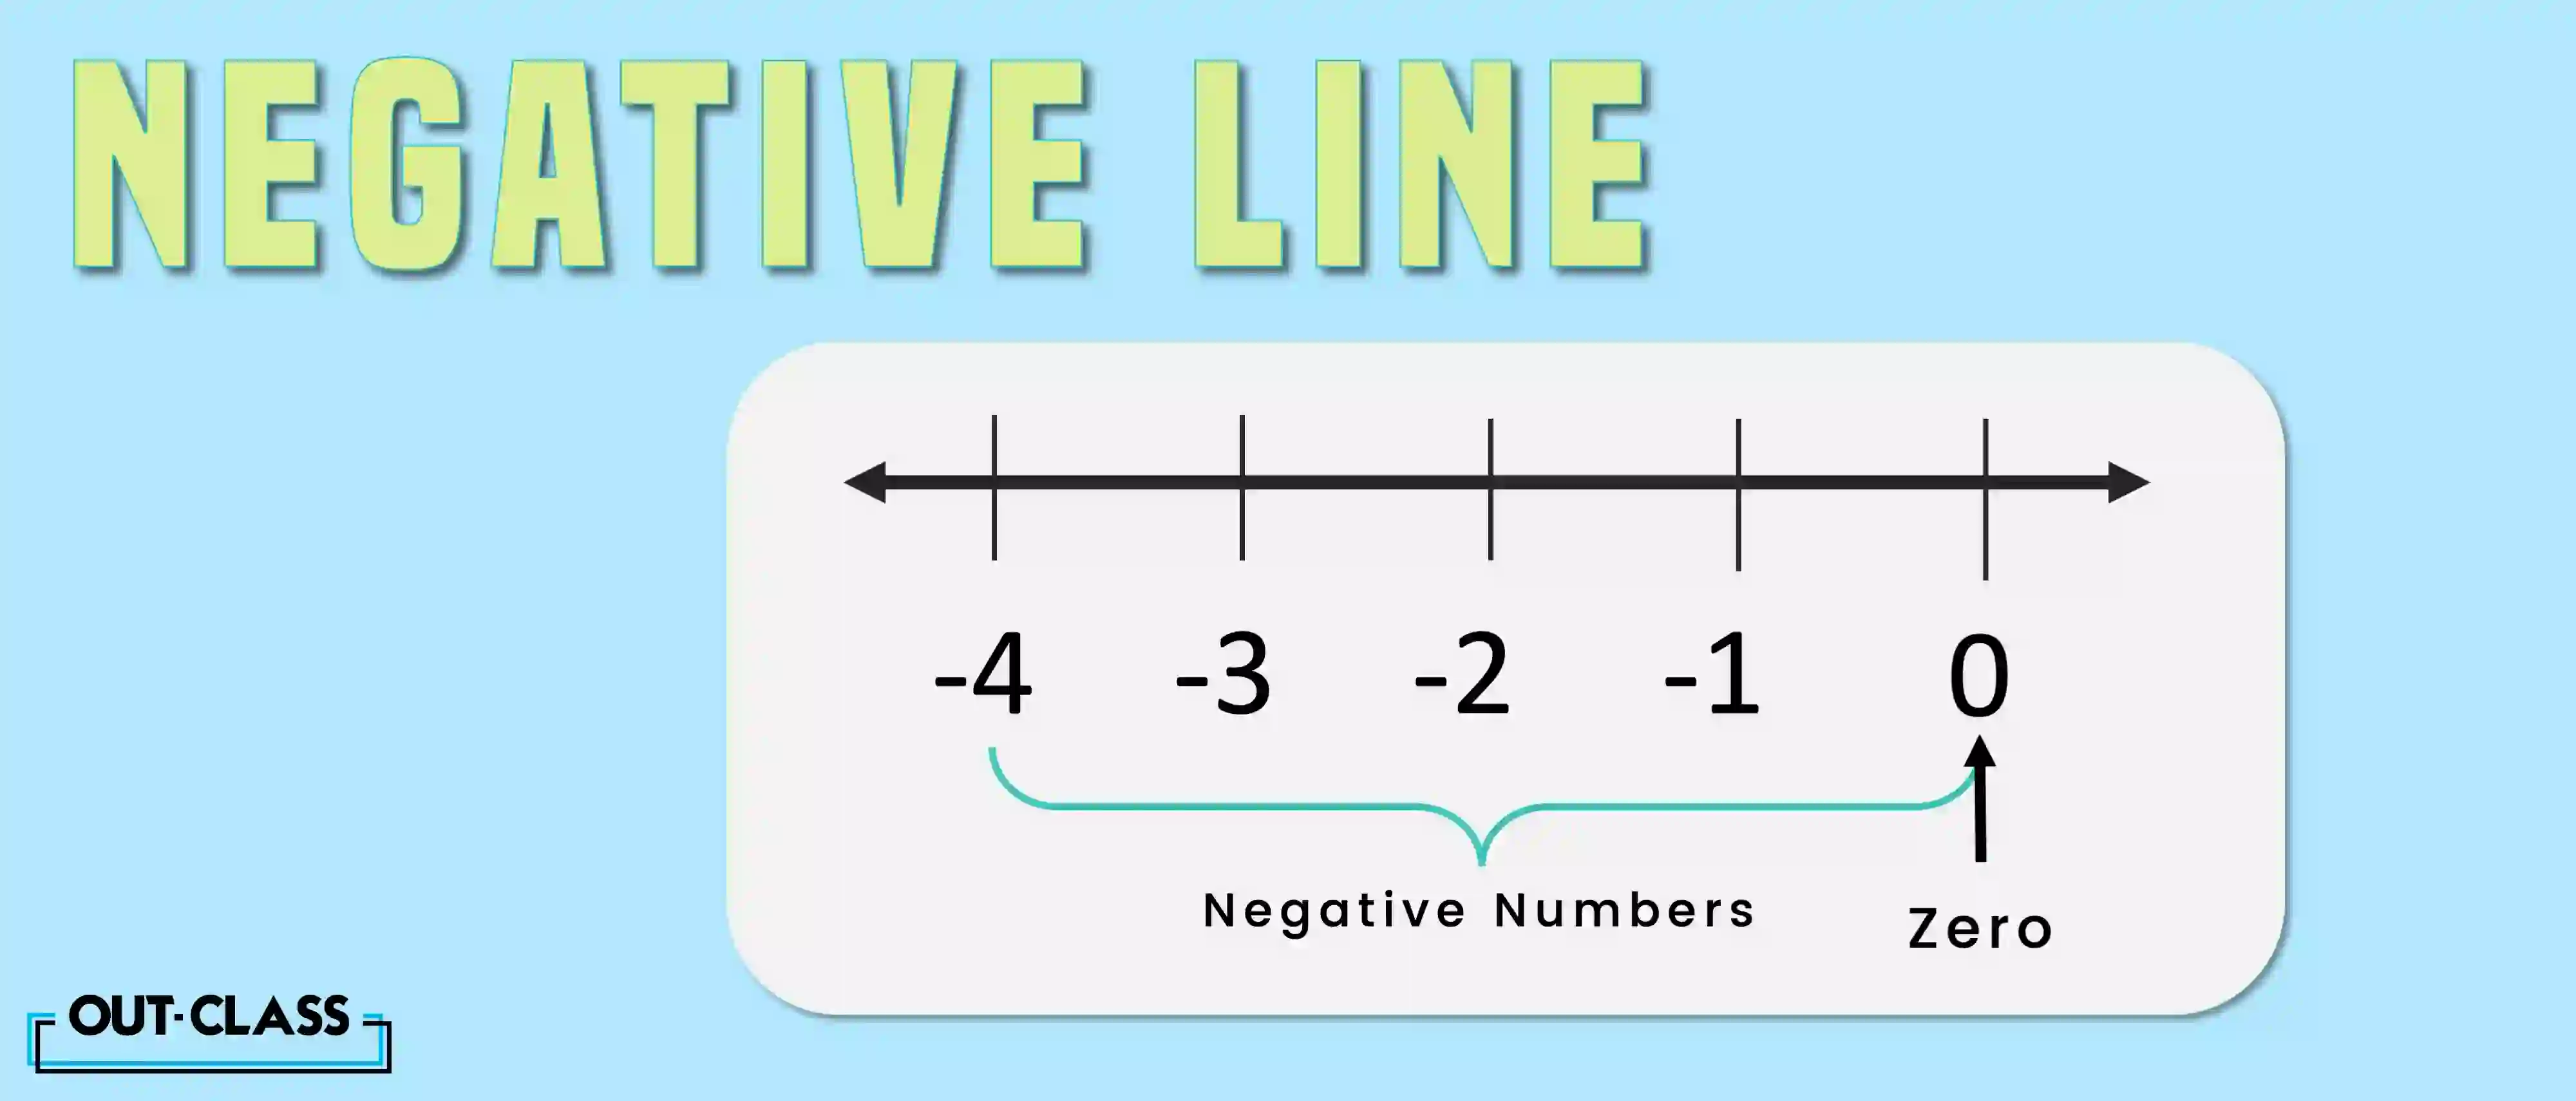 It explains what is a negative number line. Numbers that start from 0 and move towards the left on a straight line are known as negative numbers. As you move further towards the left, the numbers on the line decrease.